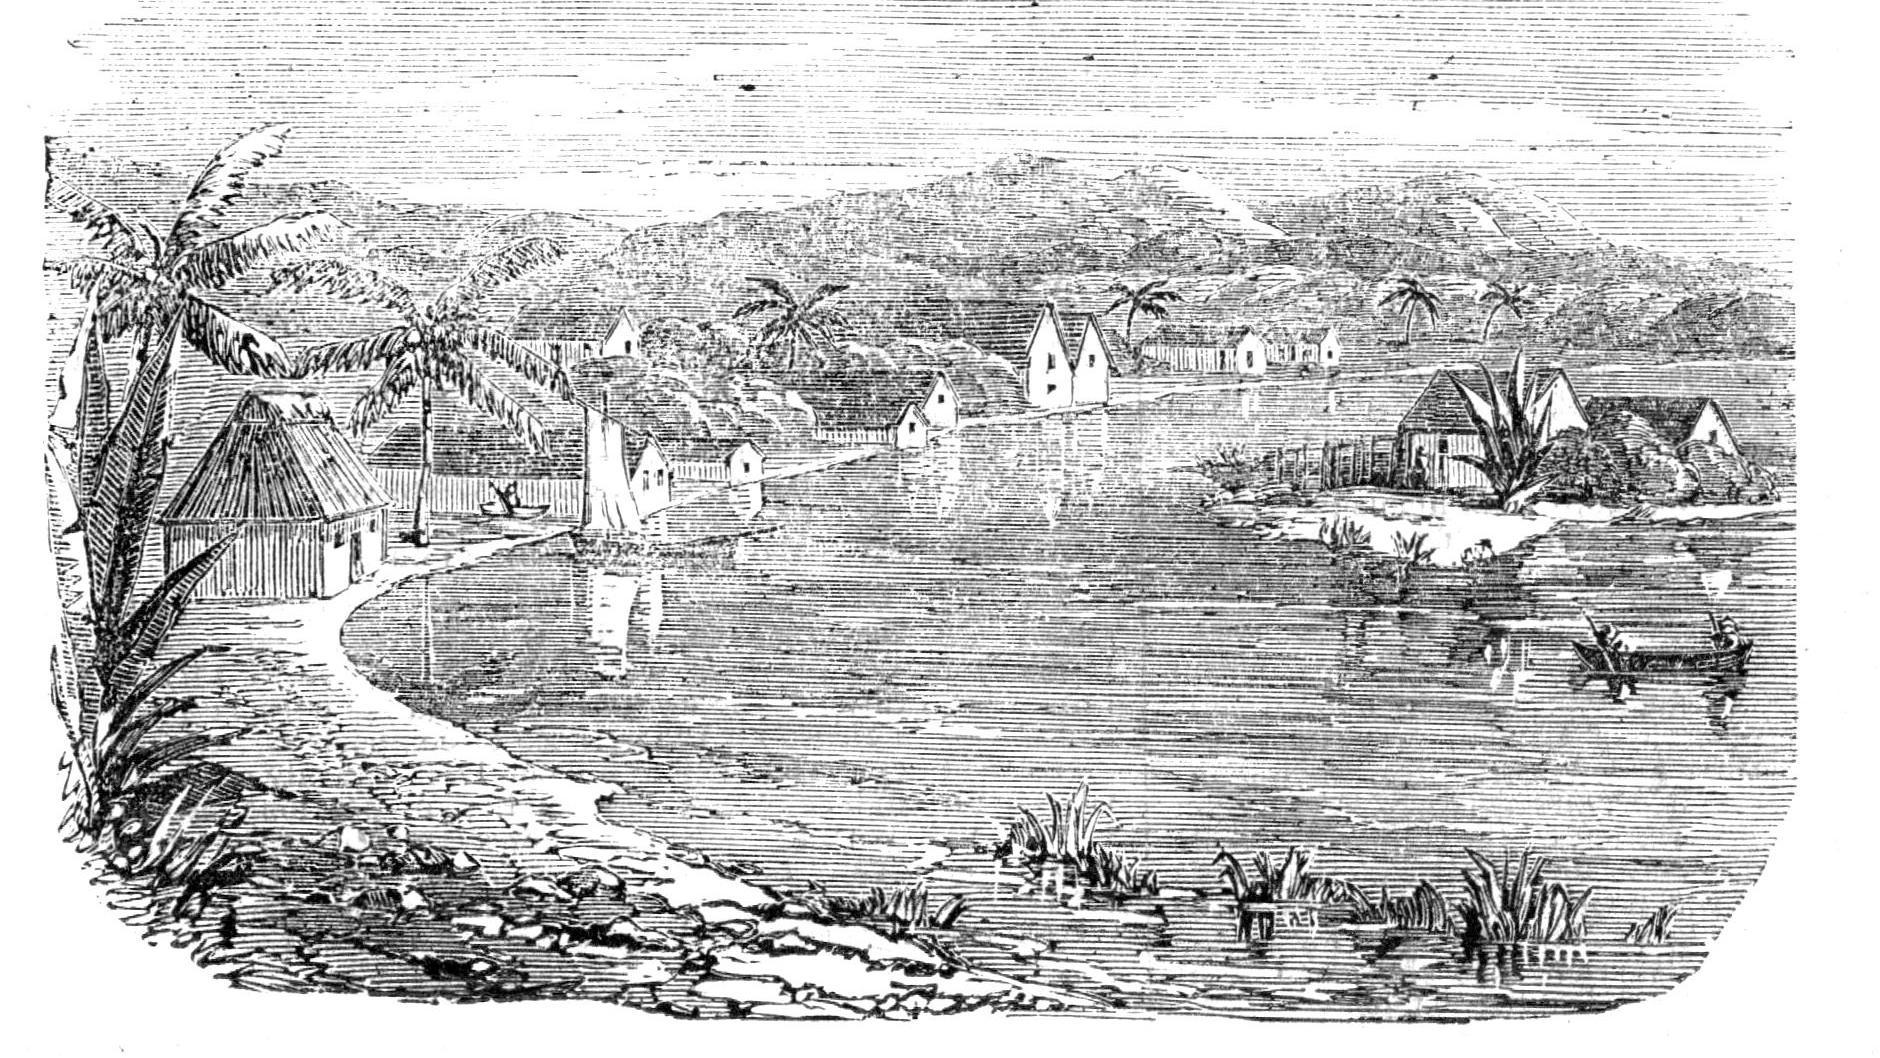 Engraving from the time about the area where the filibuster general William Walker was located